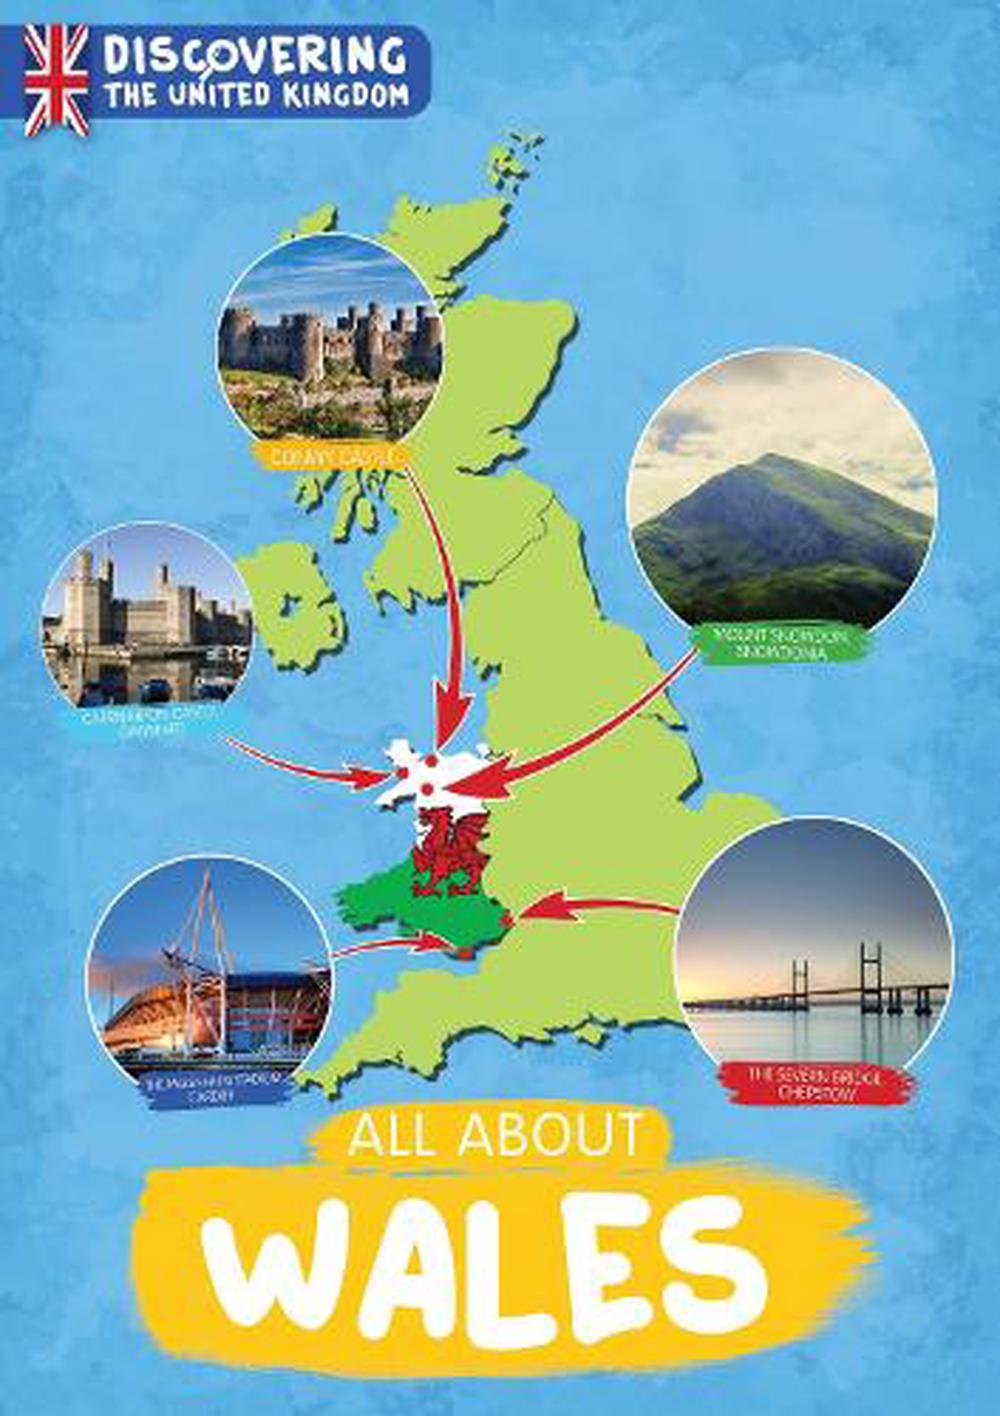 travel book wales